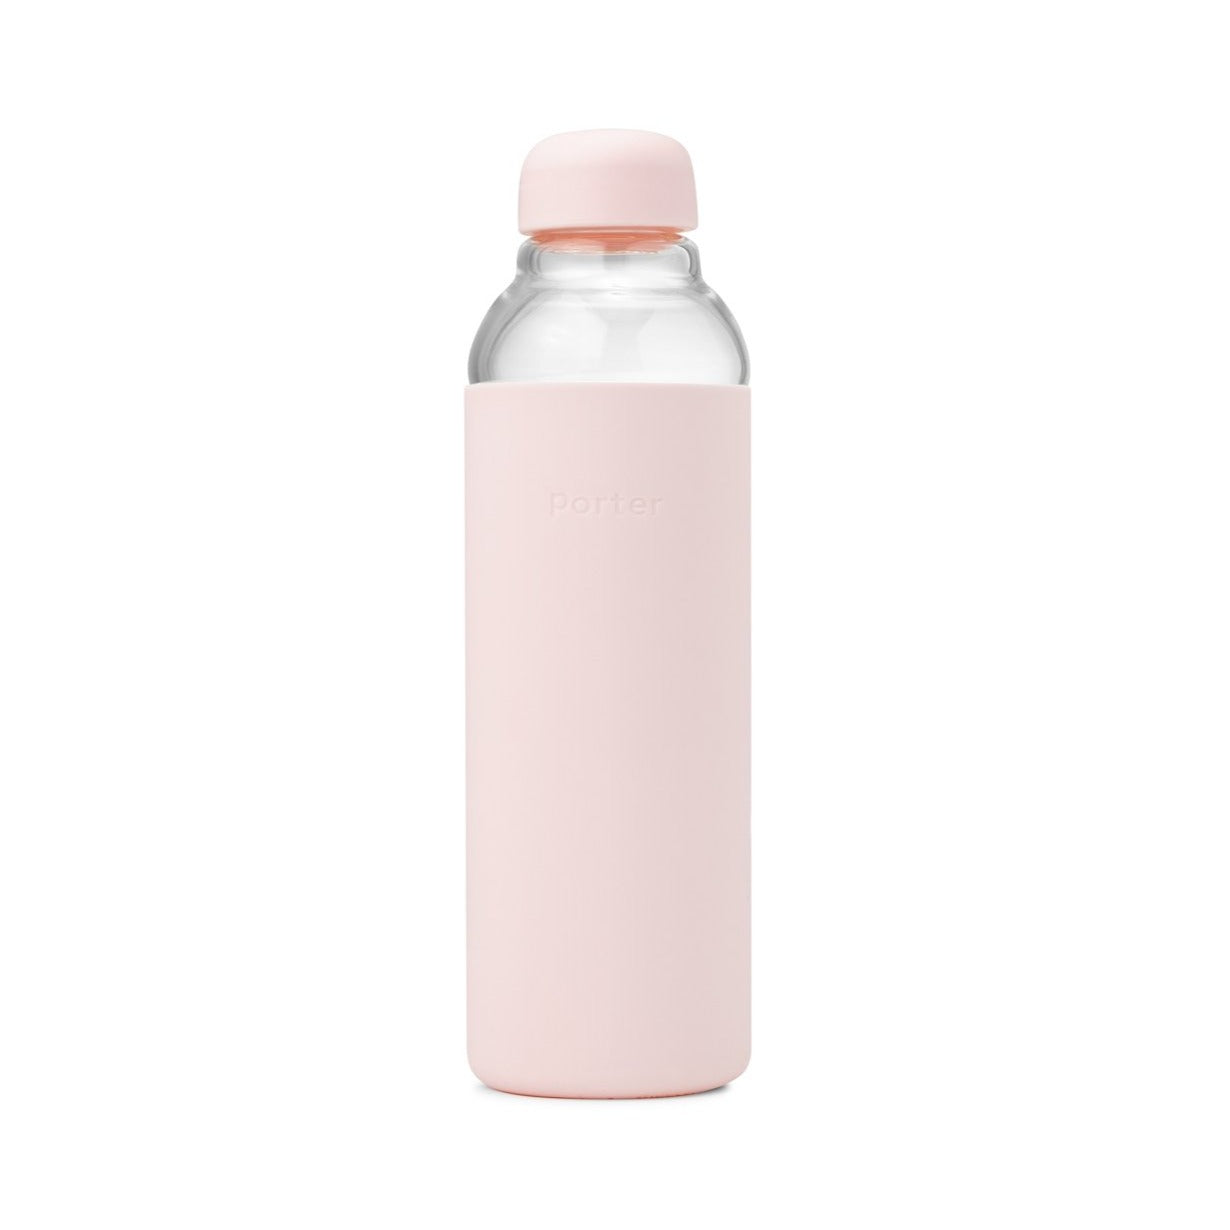 Glass bottle with pink silicone cover and cap.